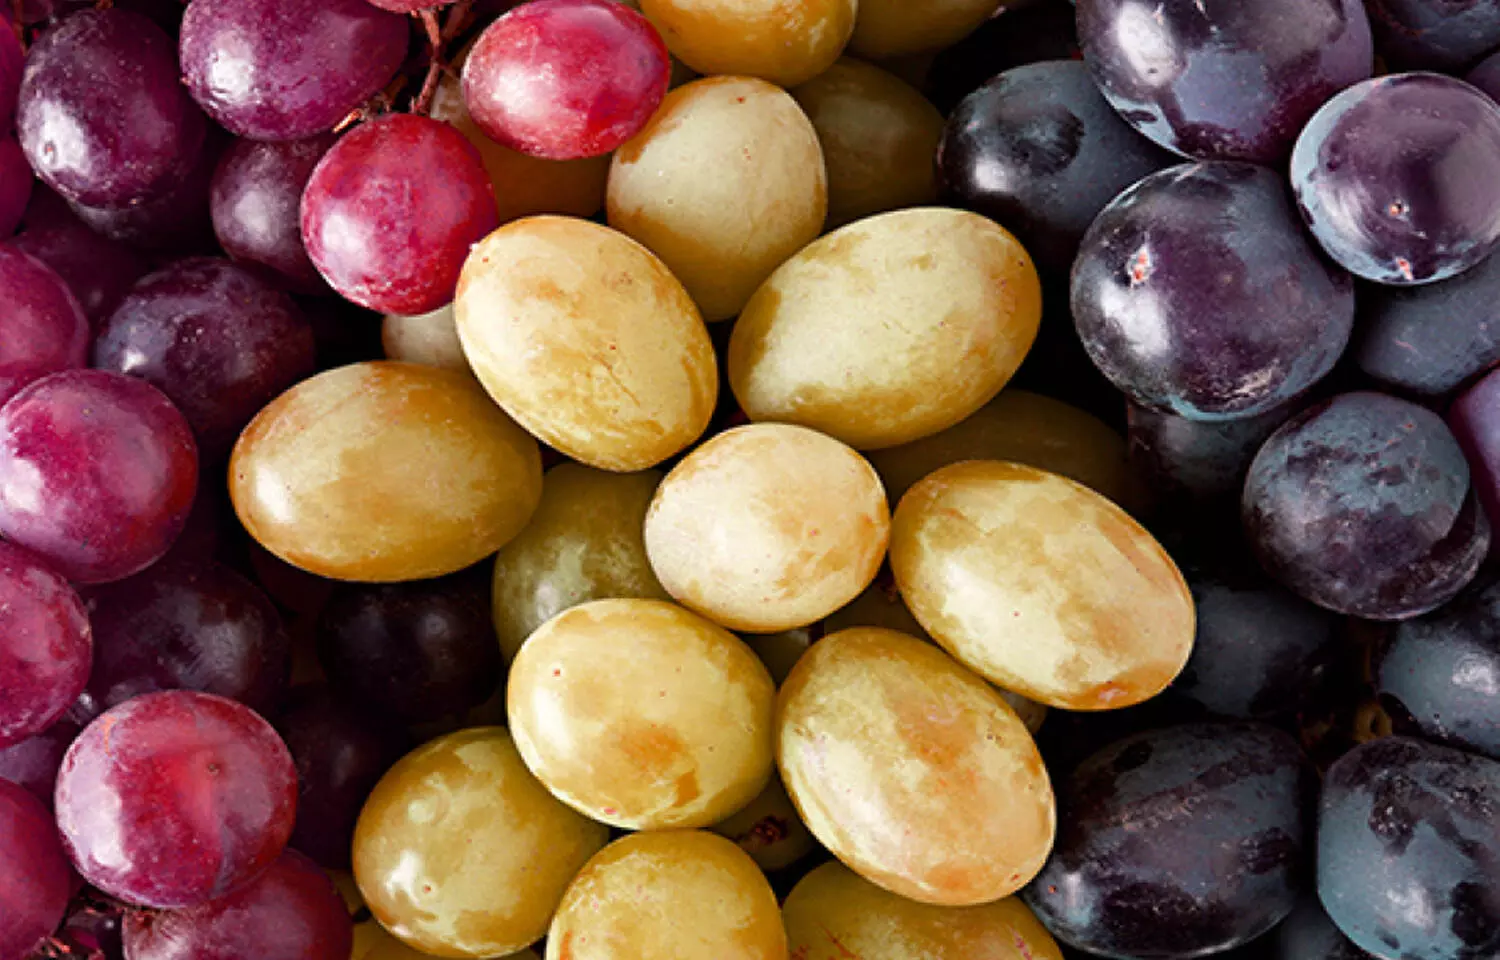 Grape consumption may act as  edible sunscreen and protect against sun damage